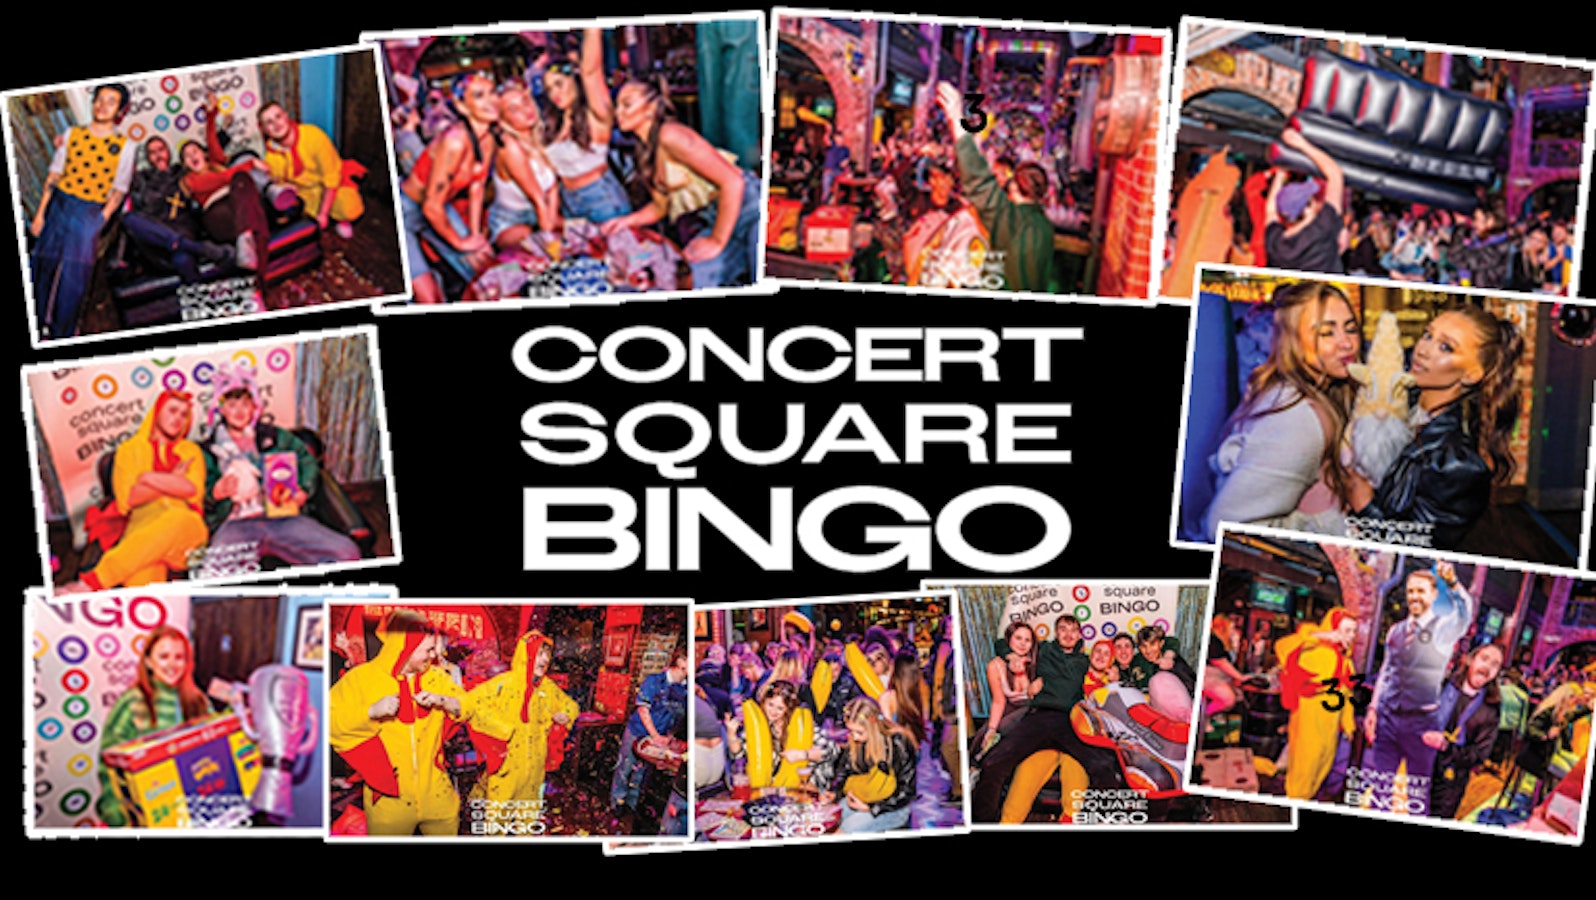 CONCERT SQUARE BINGO FRIDAYS at Einstein, Concert Square – WIN CASH PRIZES / WIN DRINKS / WIN BIG PRIZES / WIN STUPID PRIZES